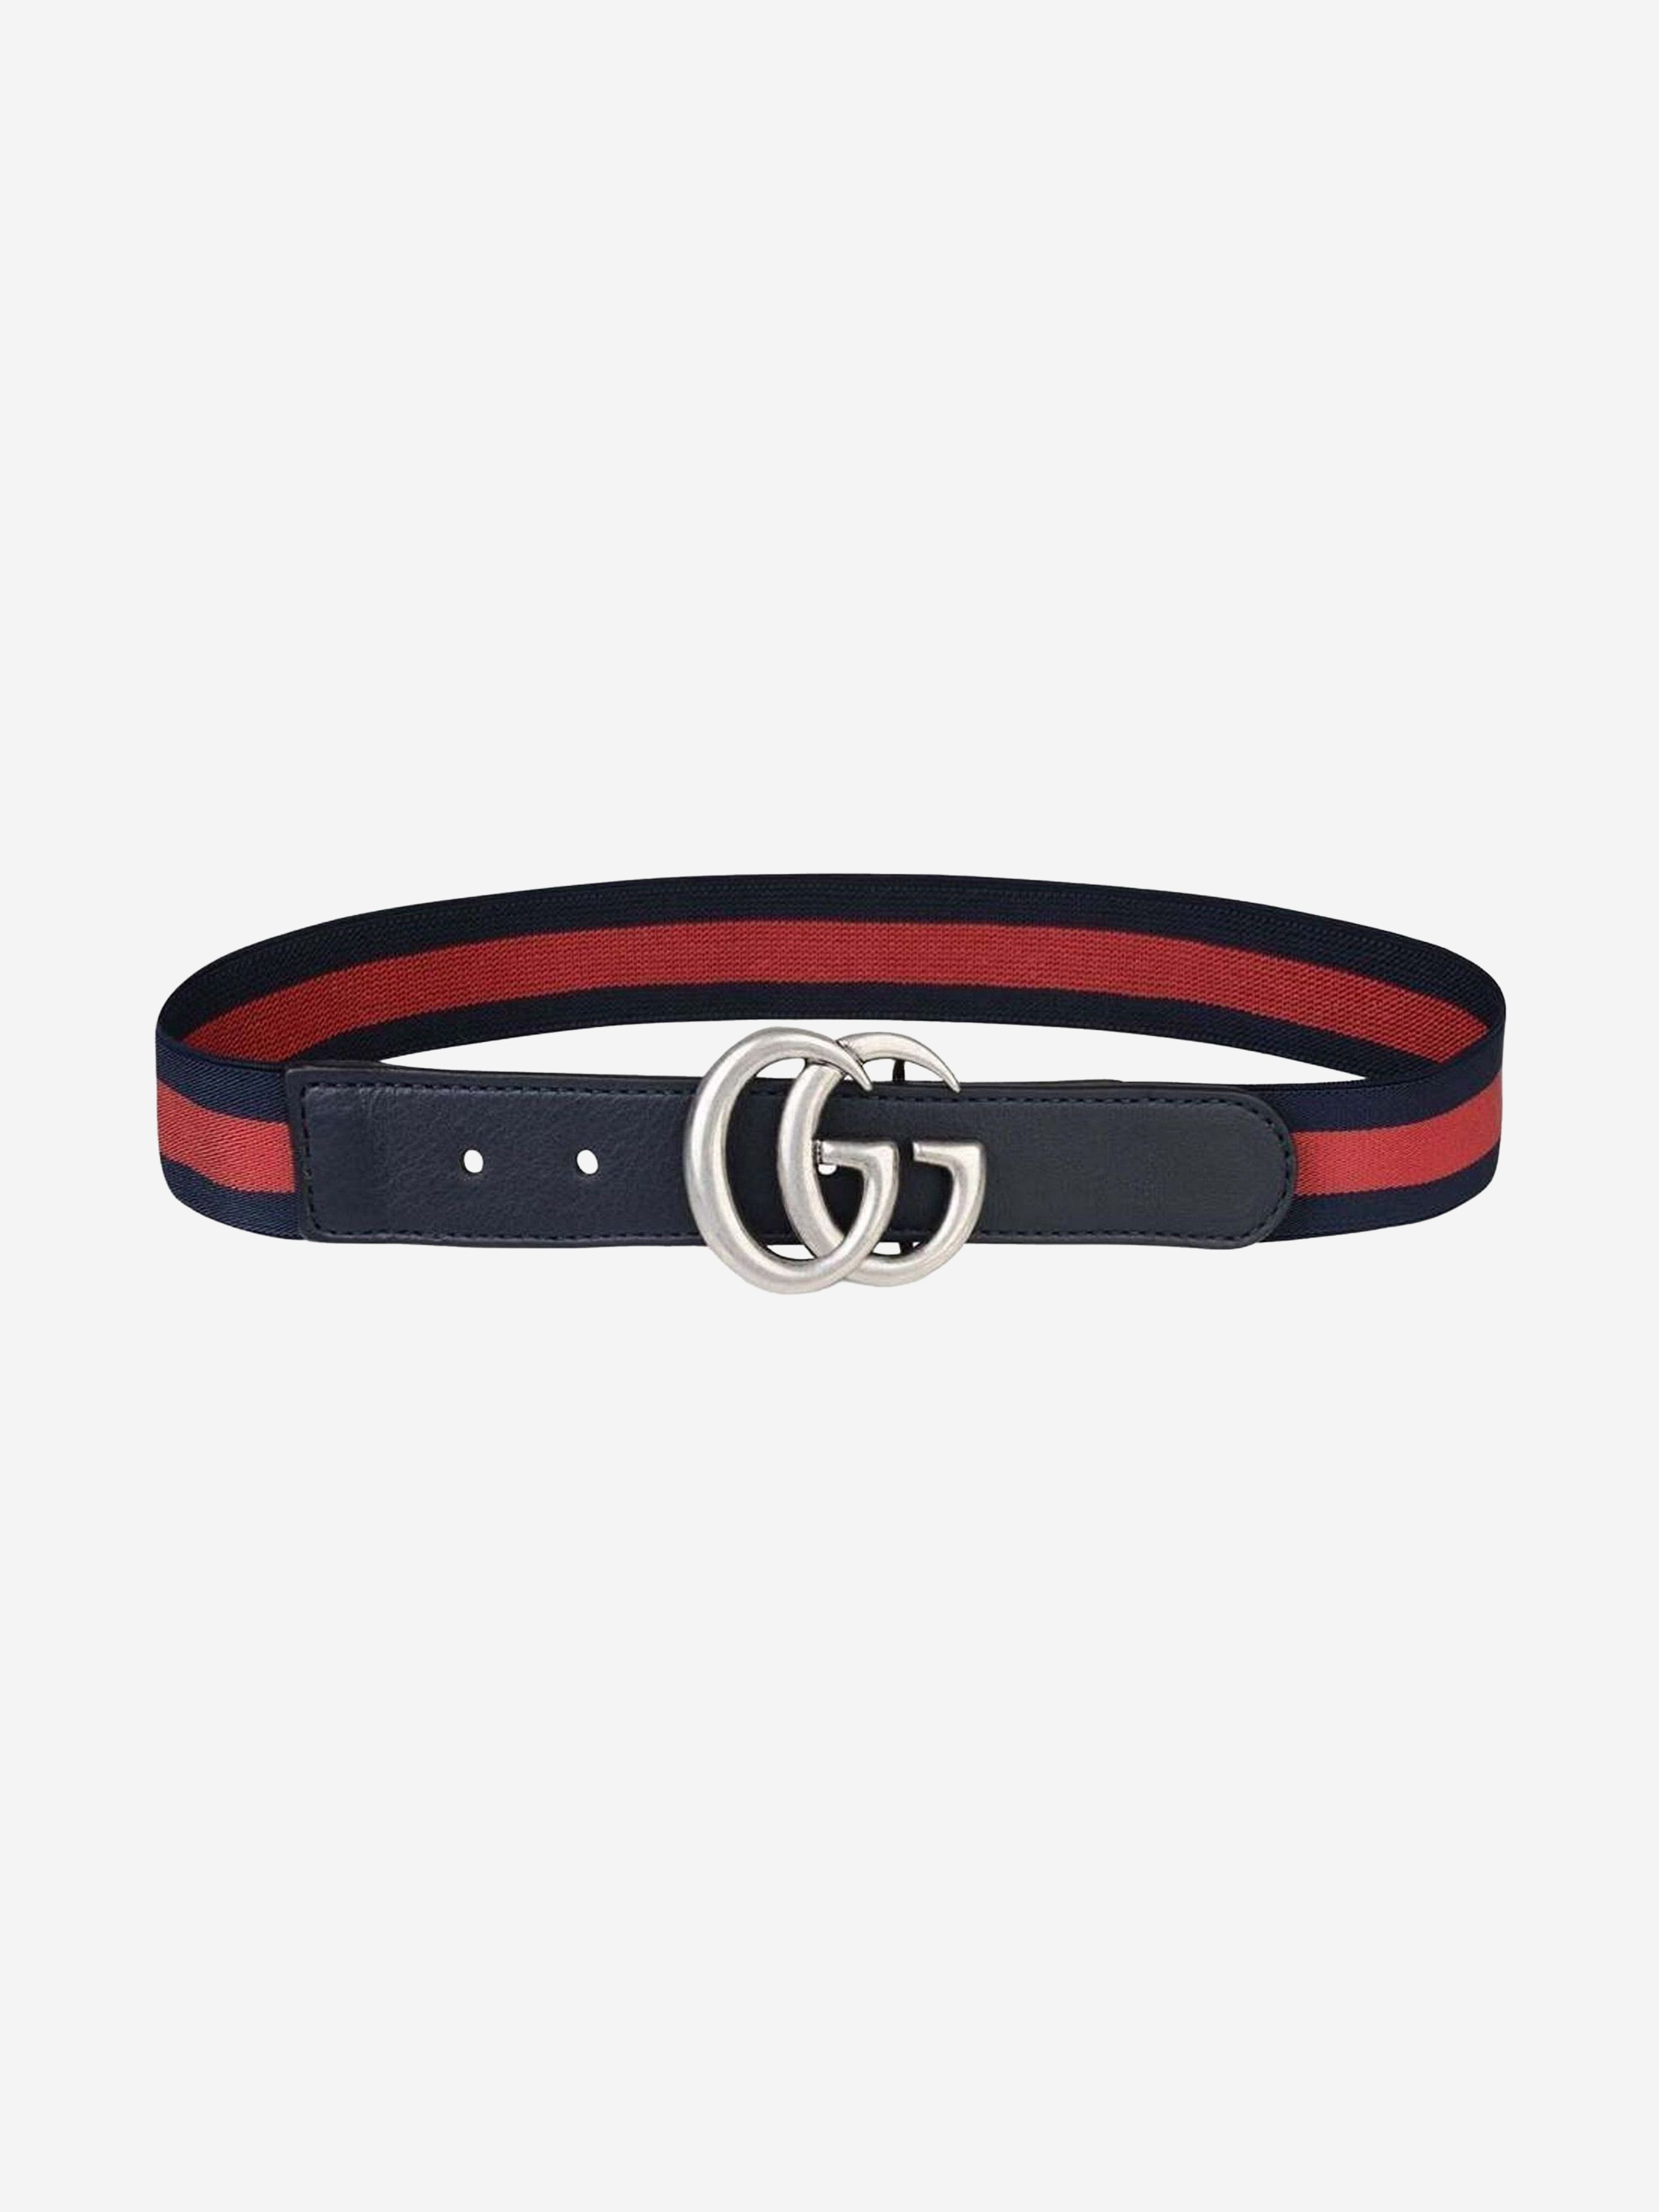 Gucci Kids Elasticated Gg Buckle Belt L (6 - 8 Yrs) Blue In Red